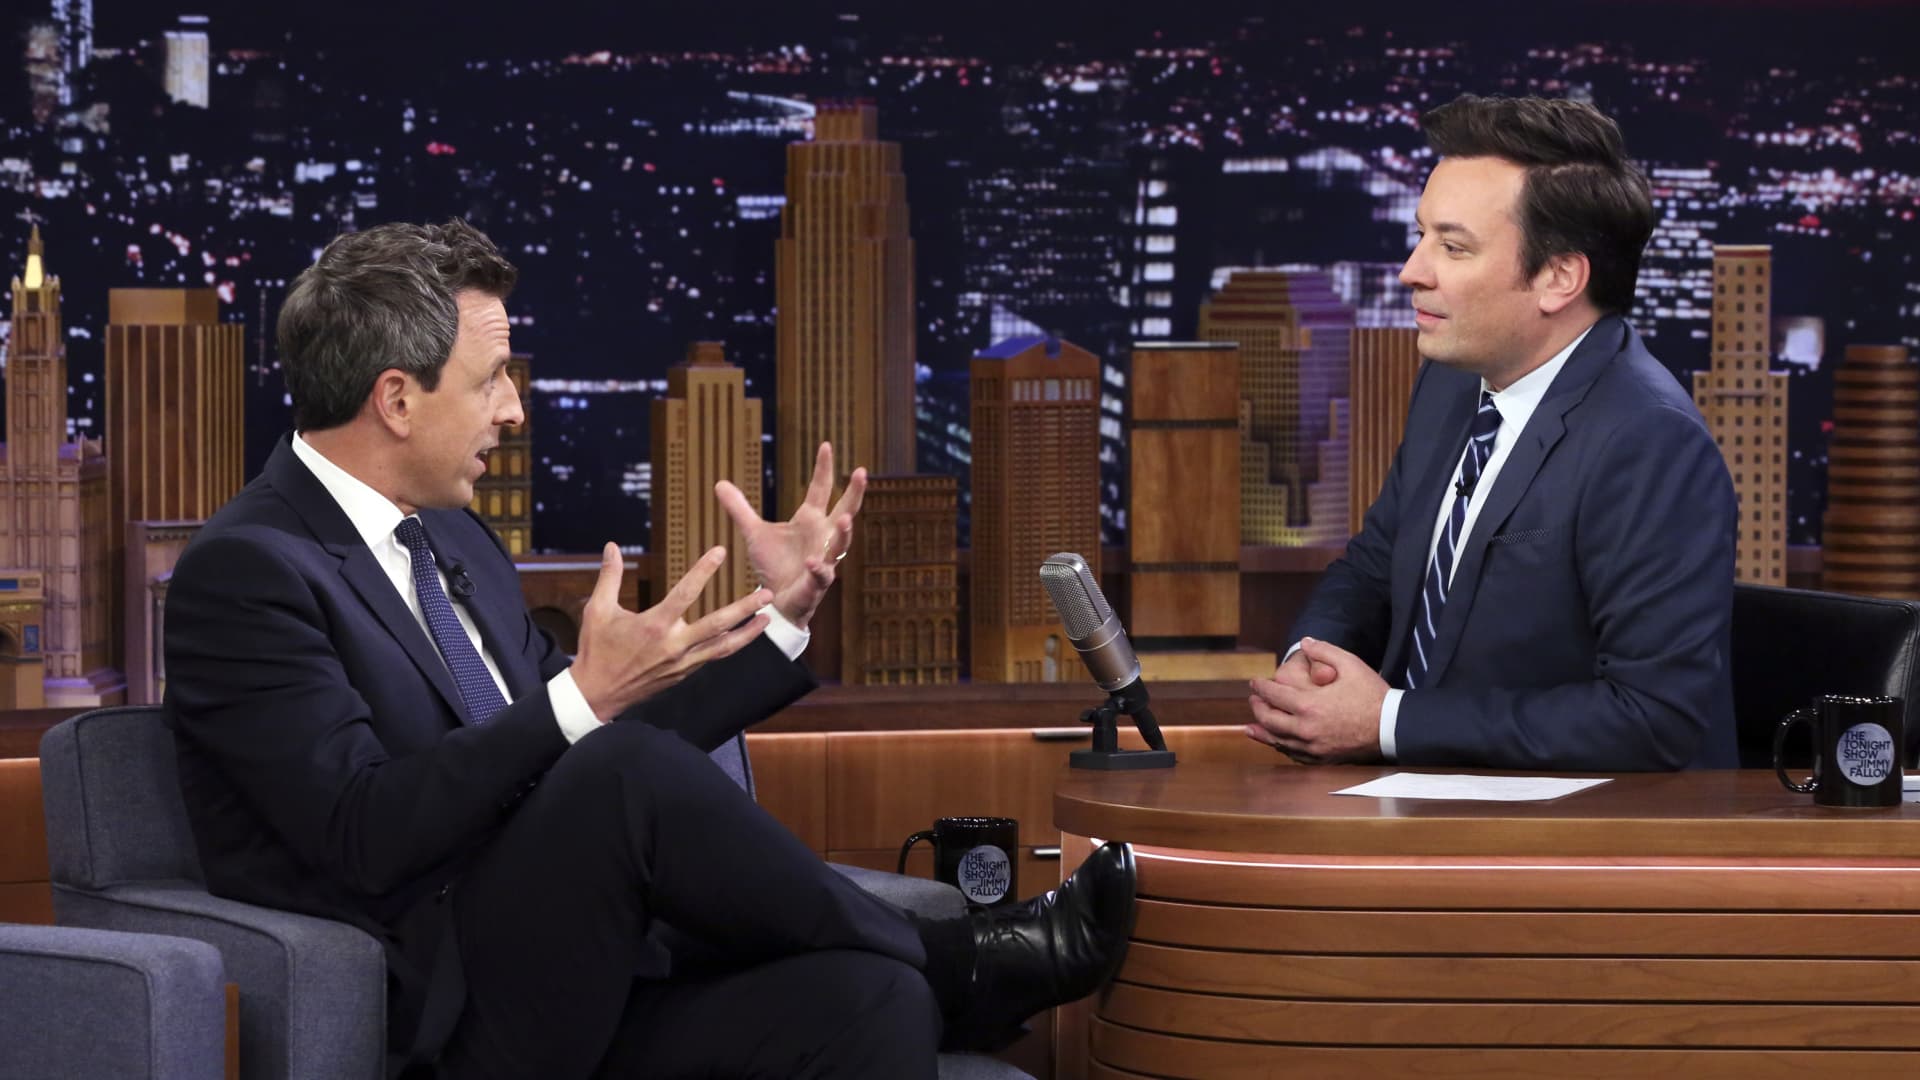 Comedian Seth Meyers during an interview with host Jimmy Fallon on November 18, 2019